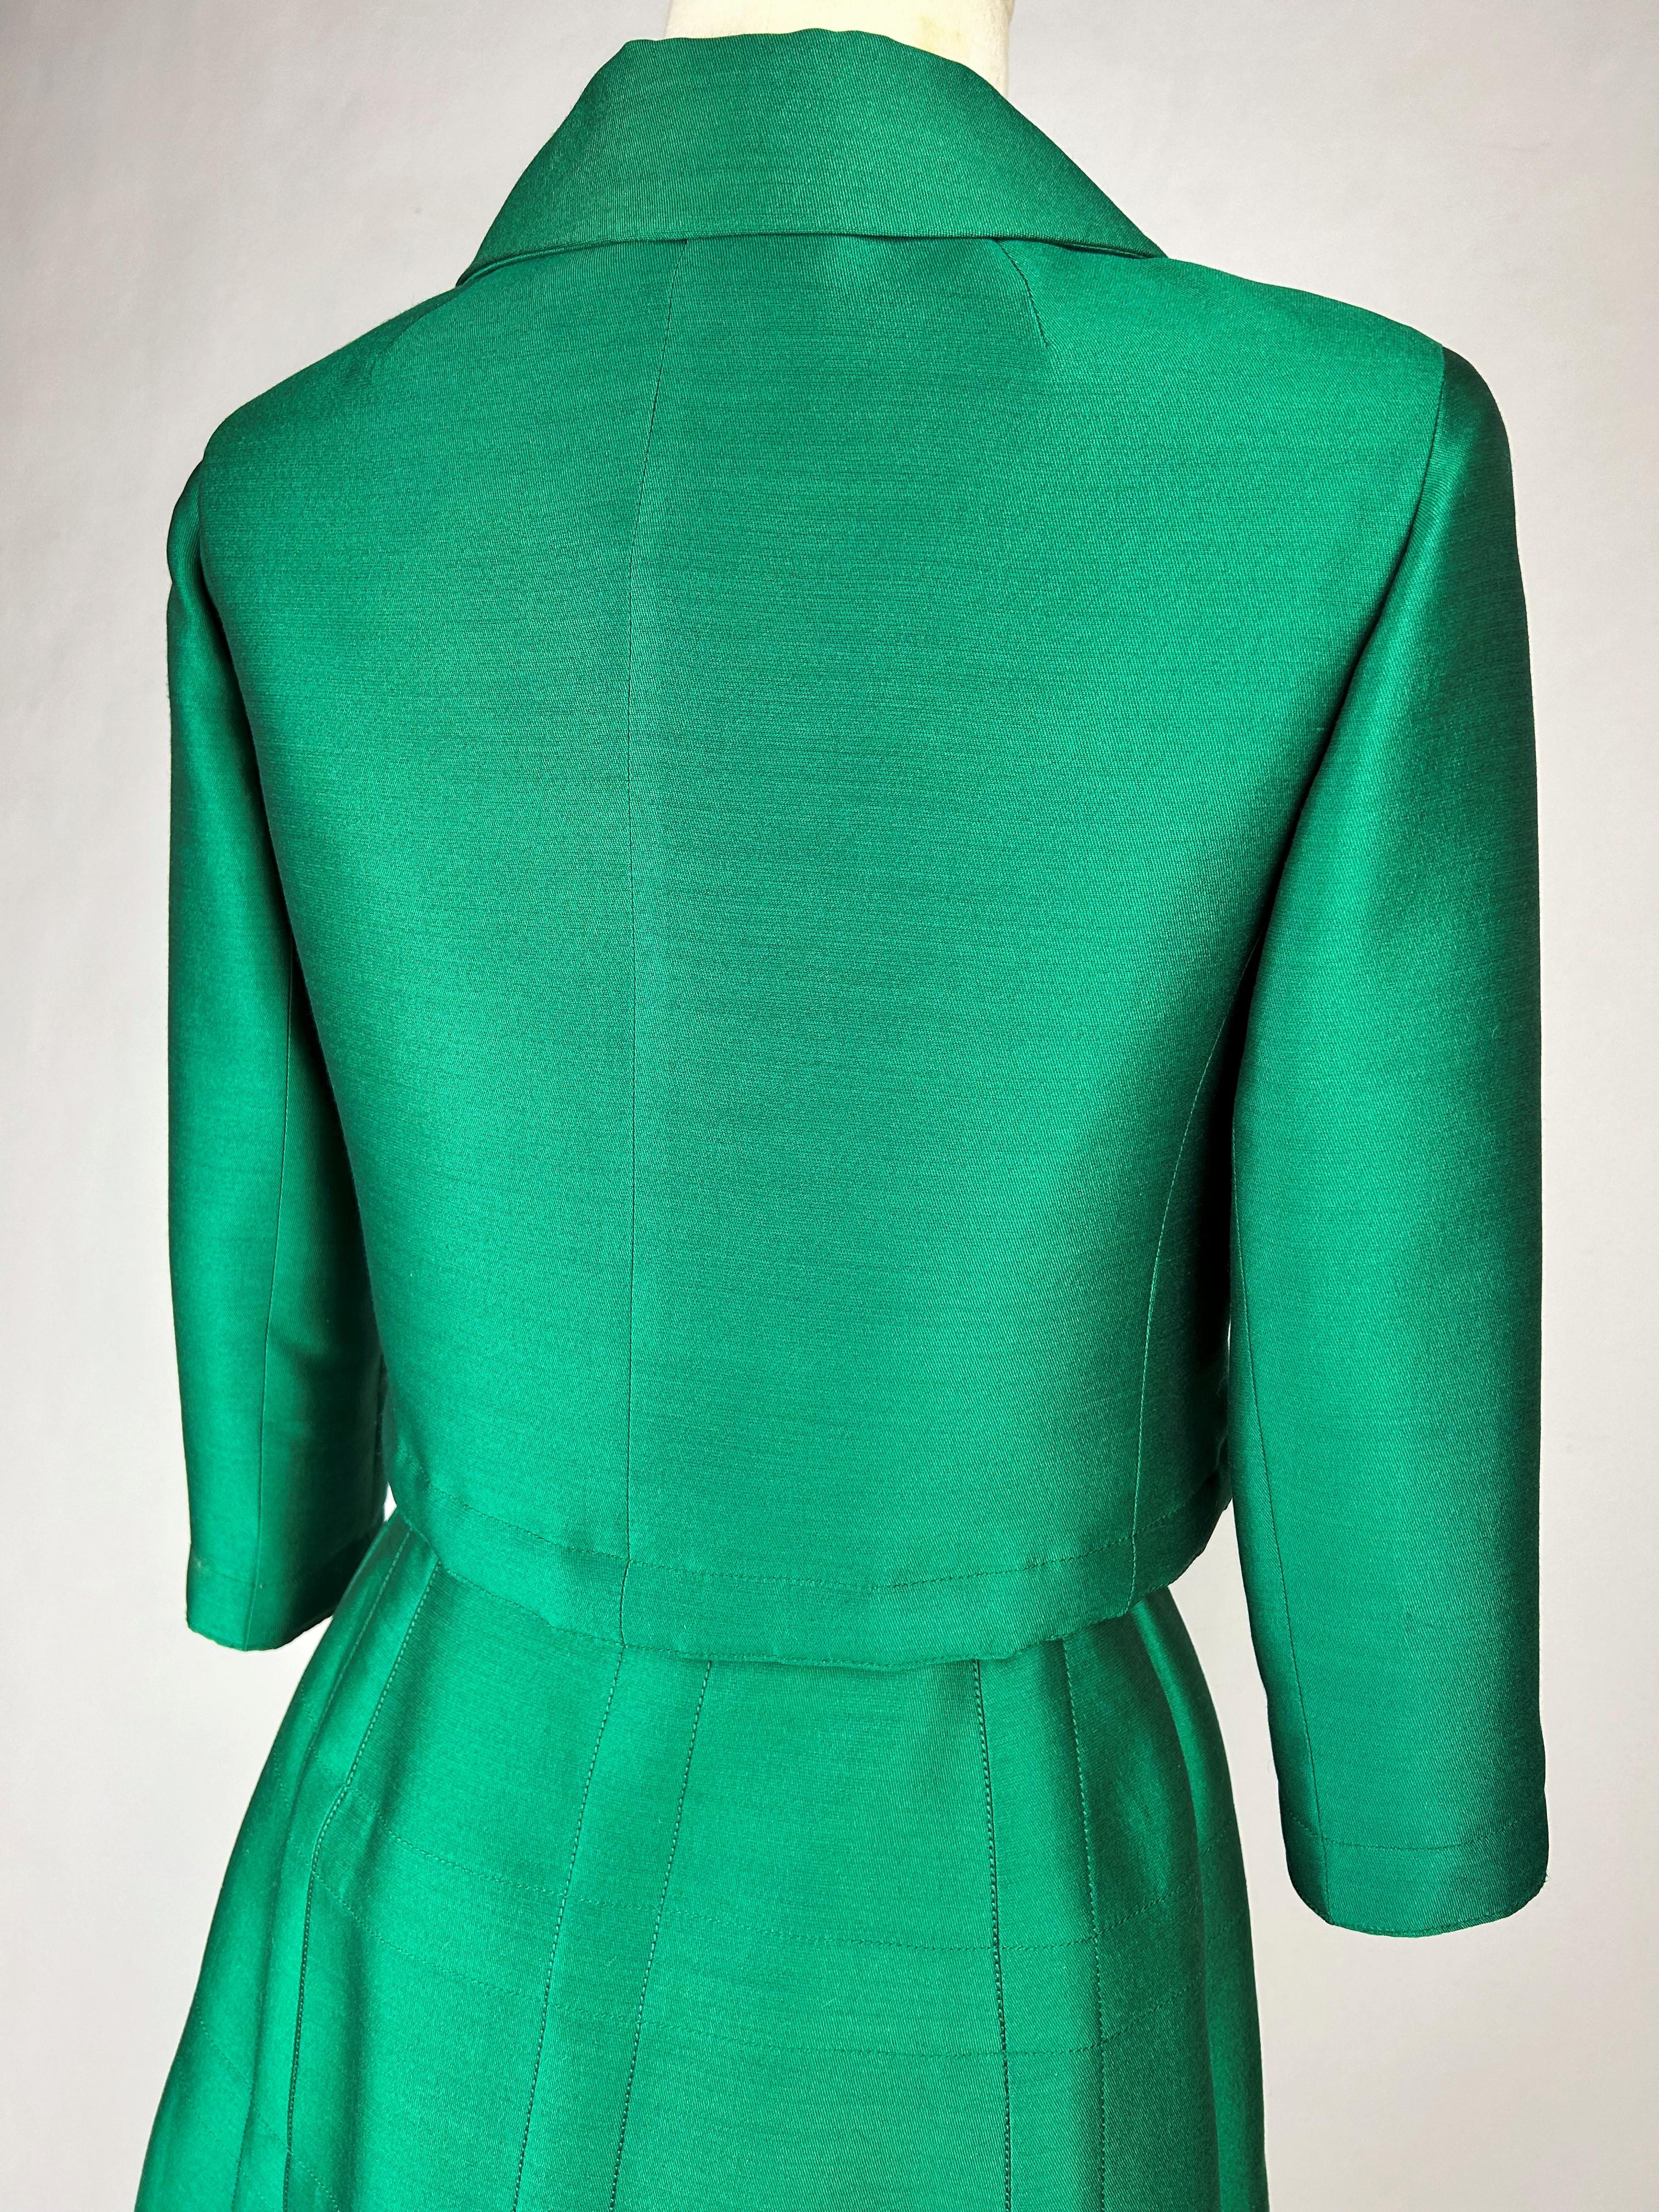 An Emerald Gazar Demi-Couture Skirt Suit by Louis Féraud Circa 1968-1972 For Sale 12